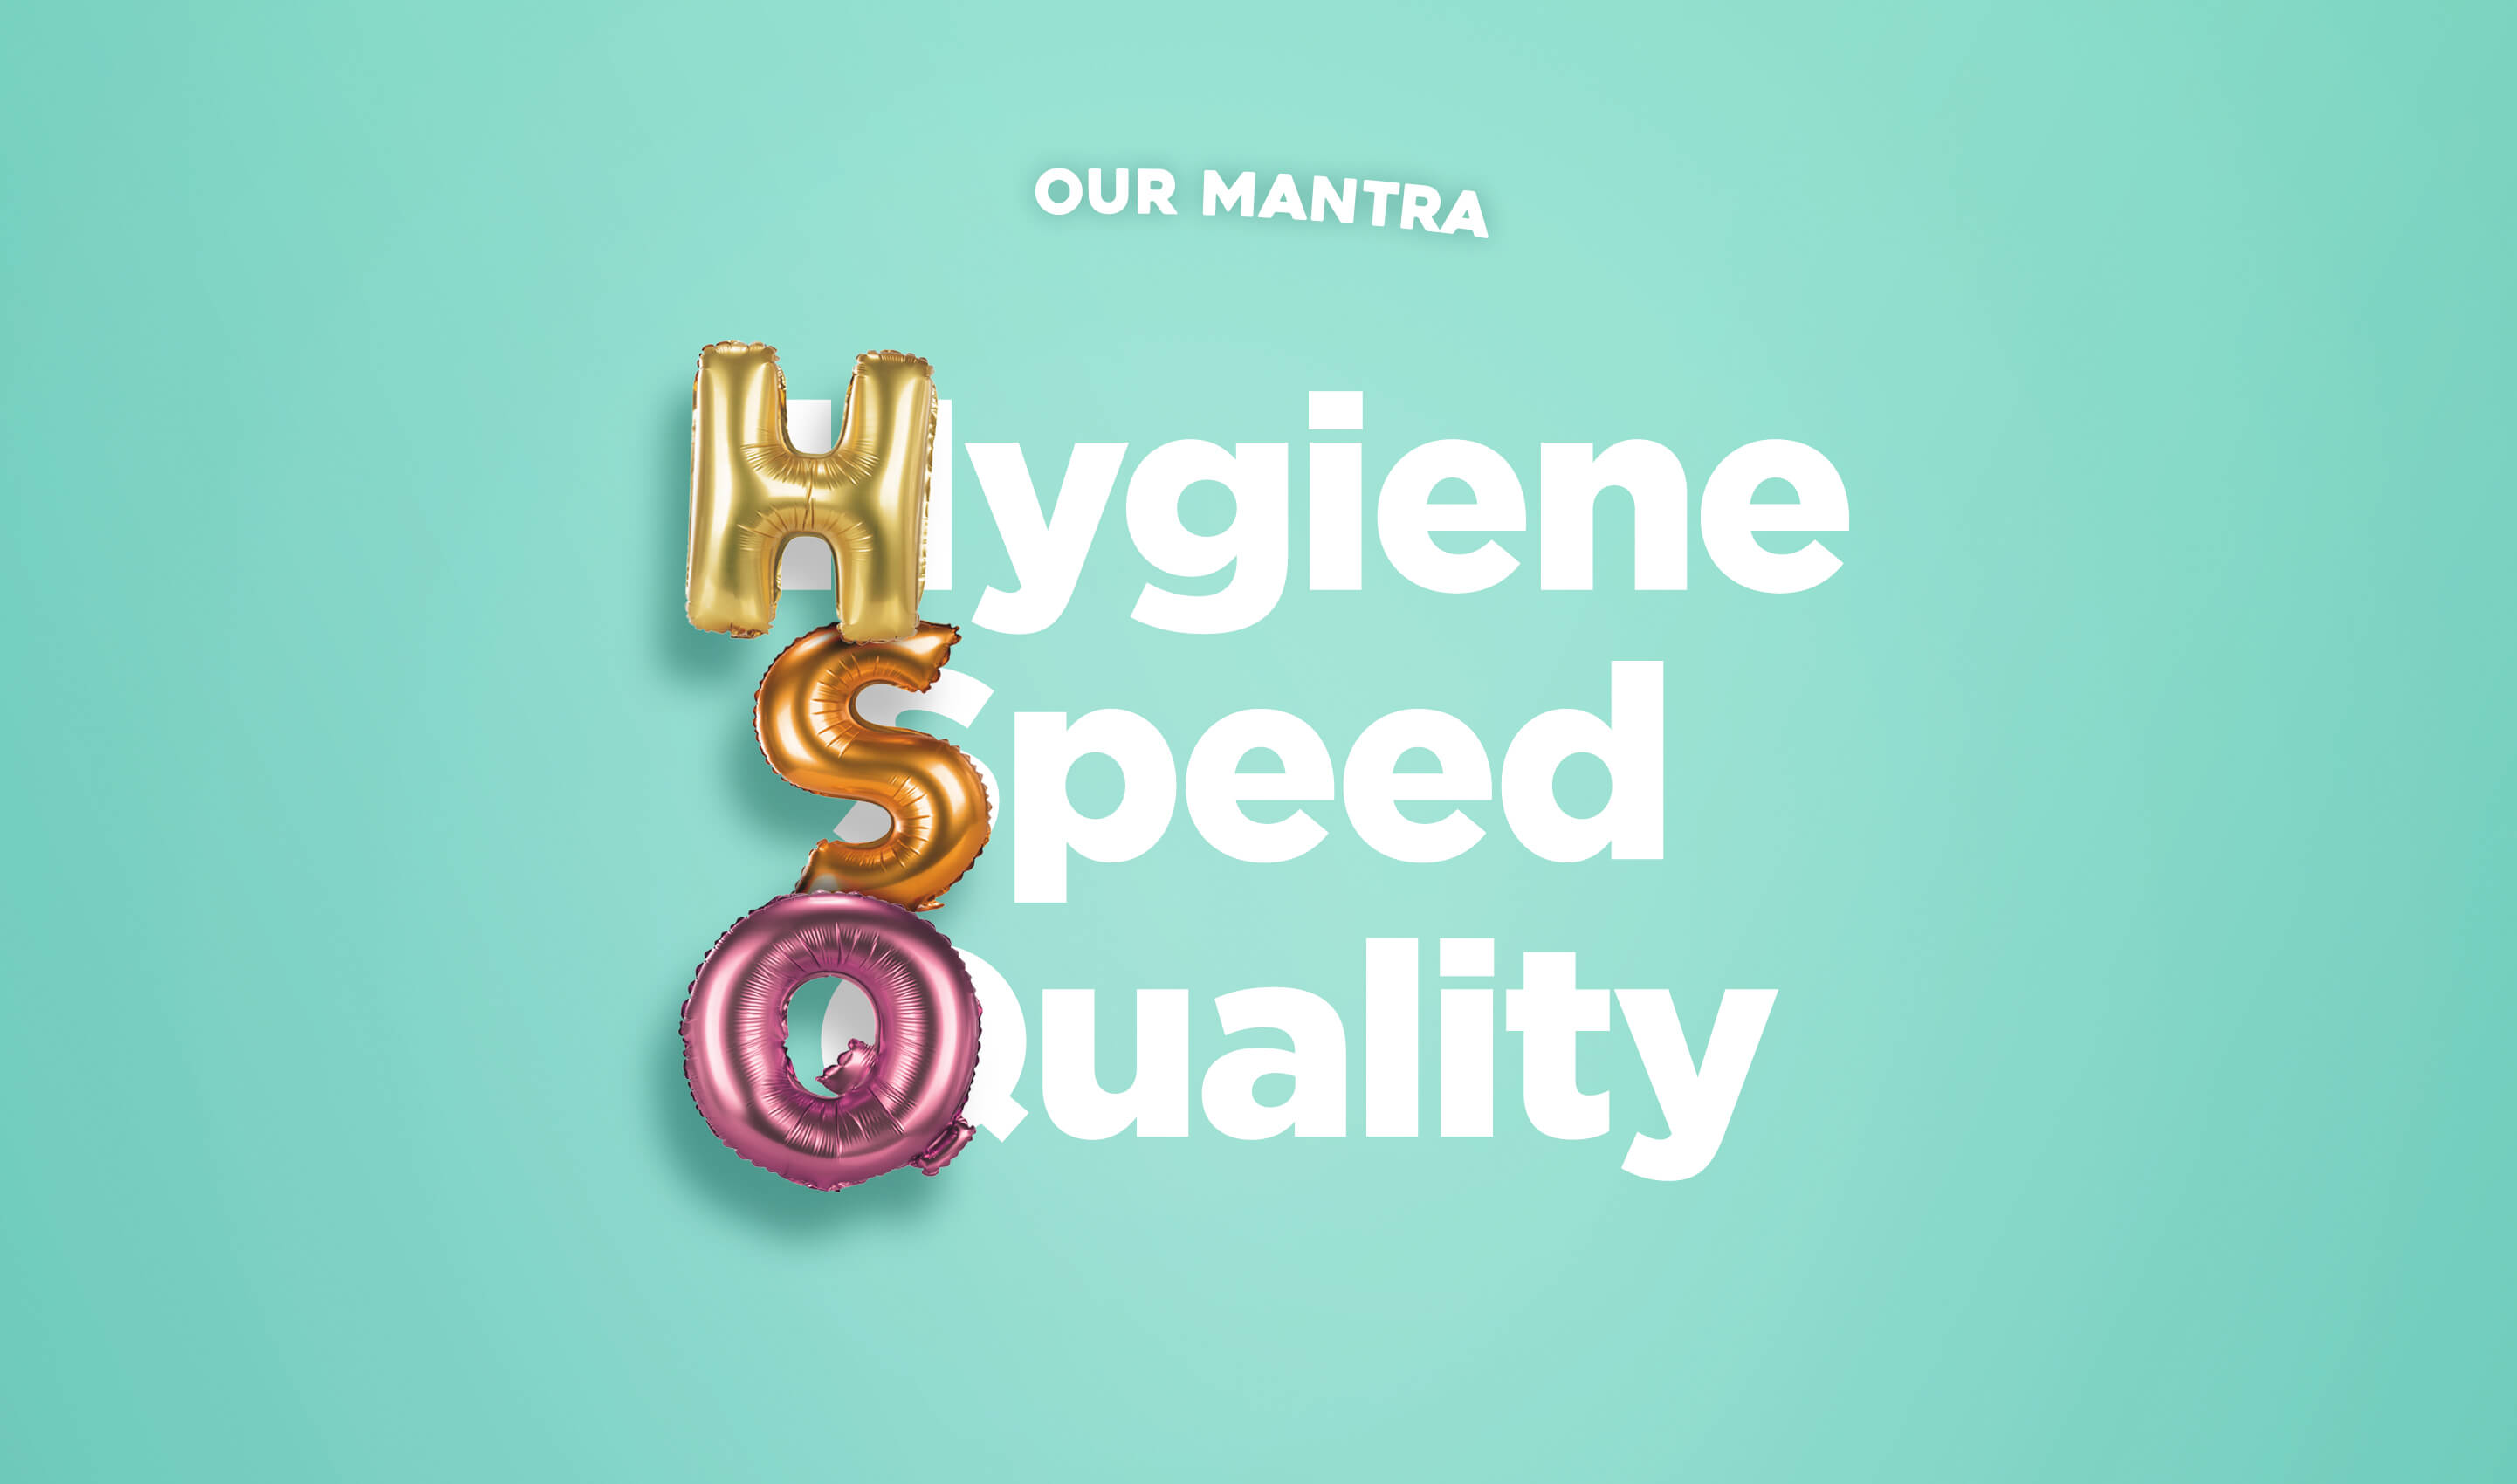 Our Mantra : Hygiene Speed Quality